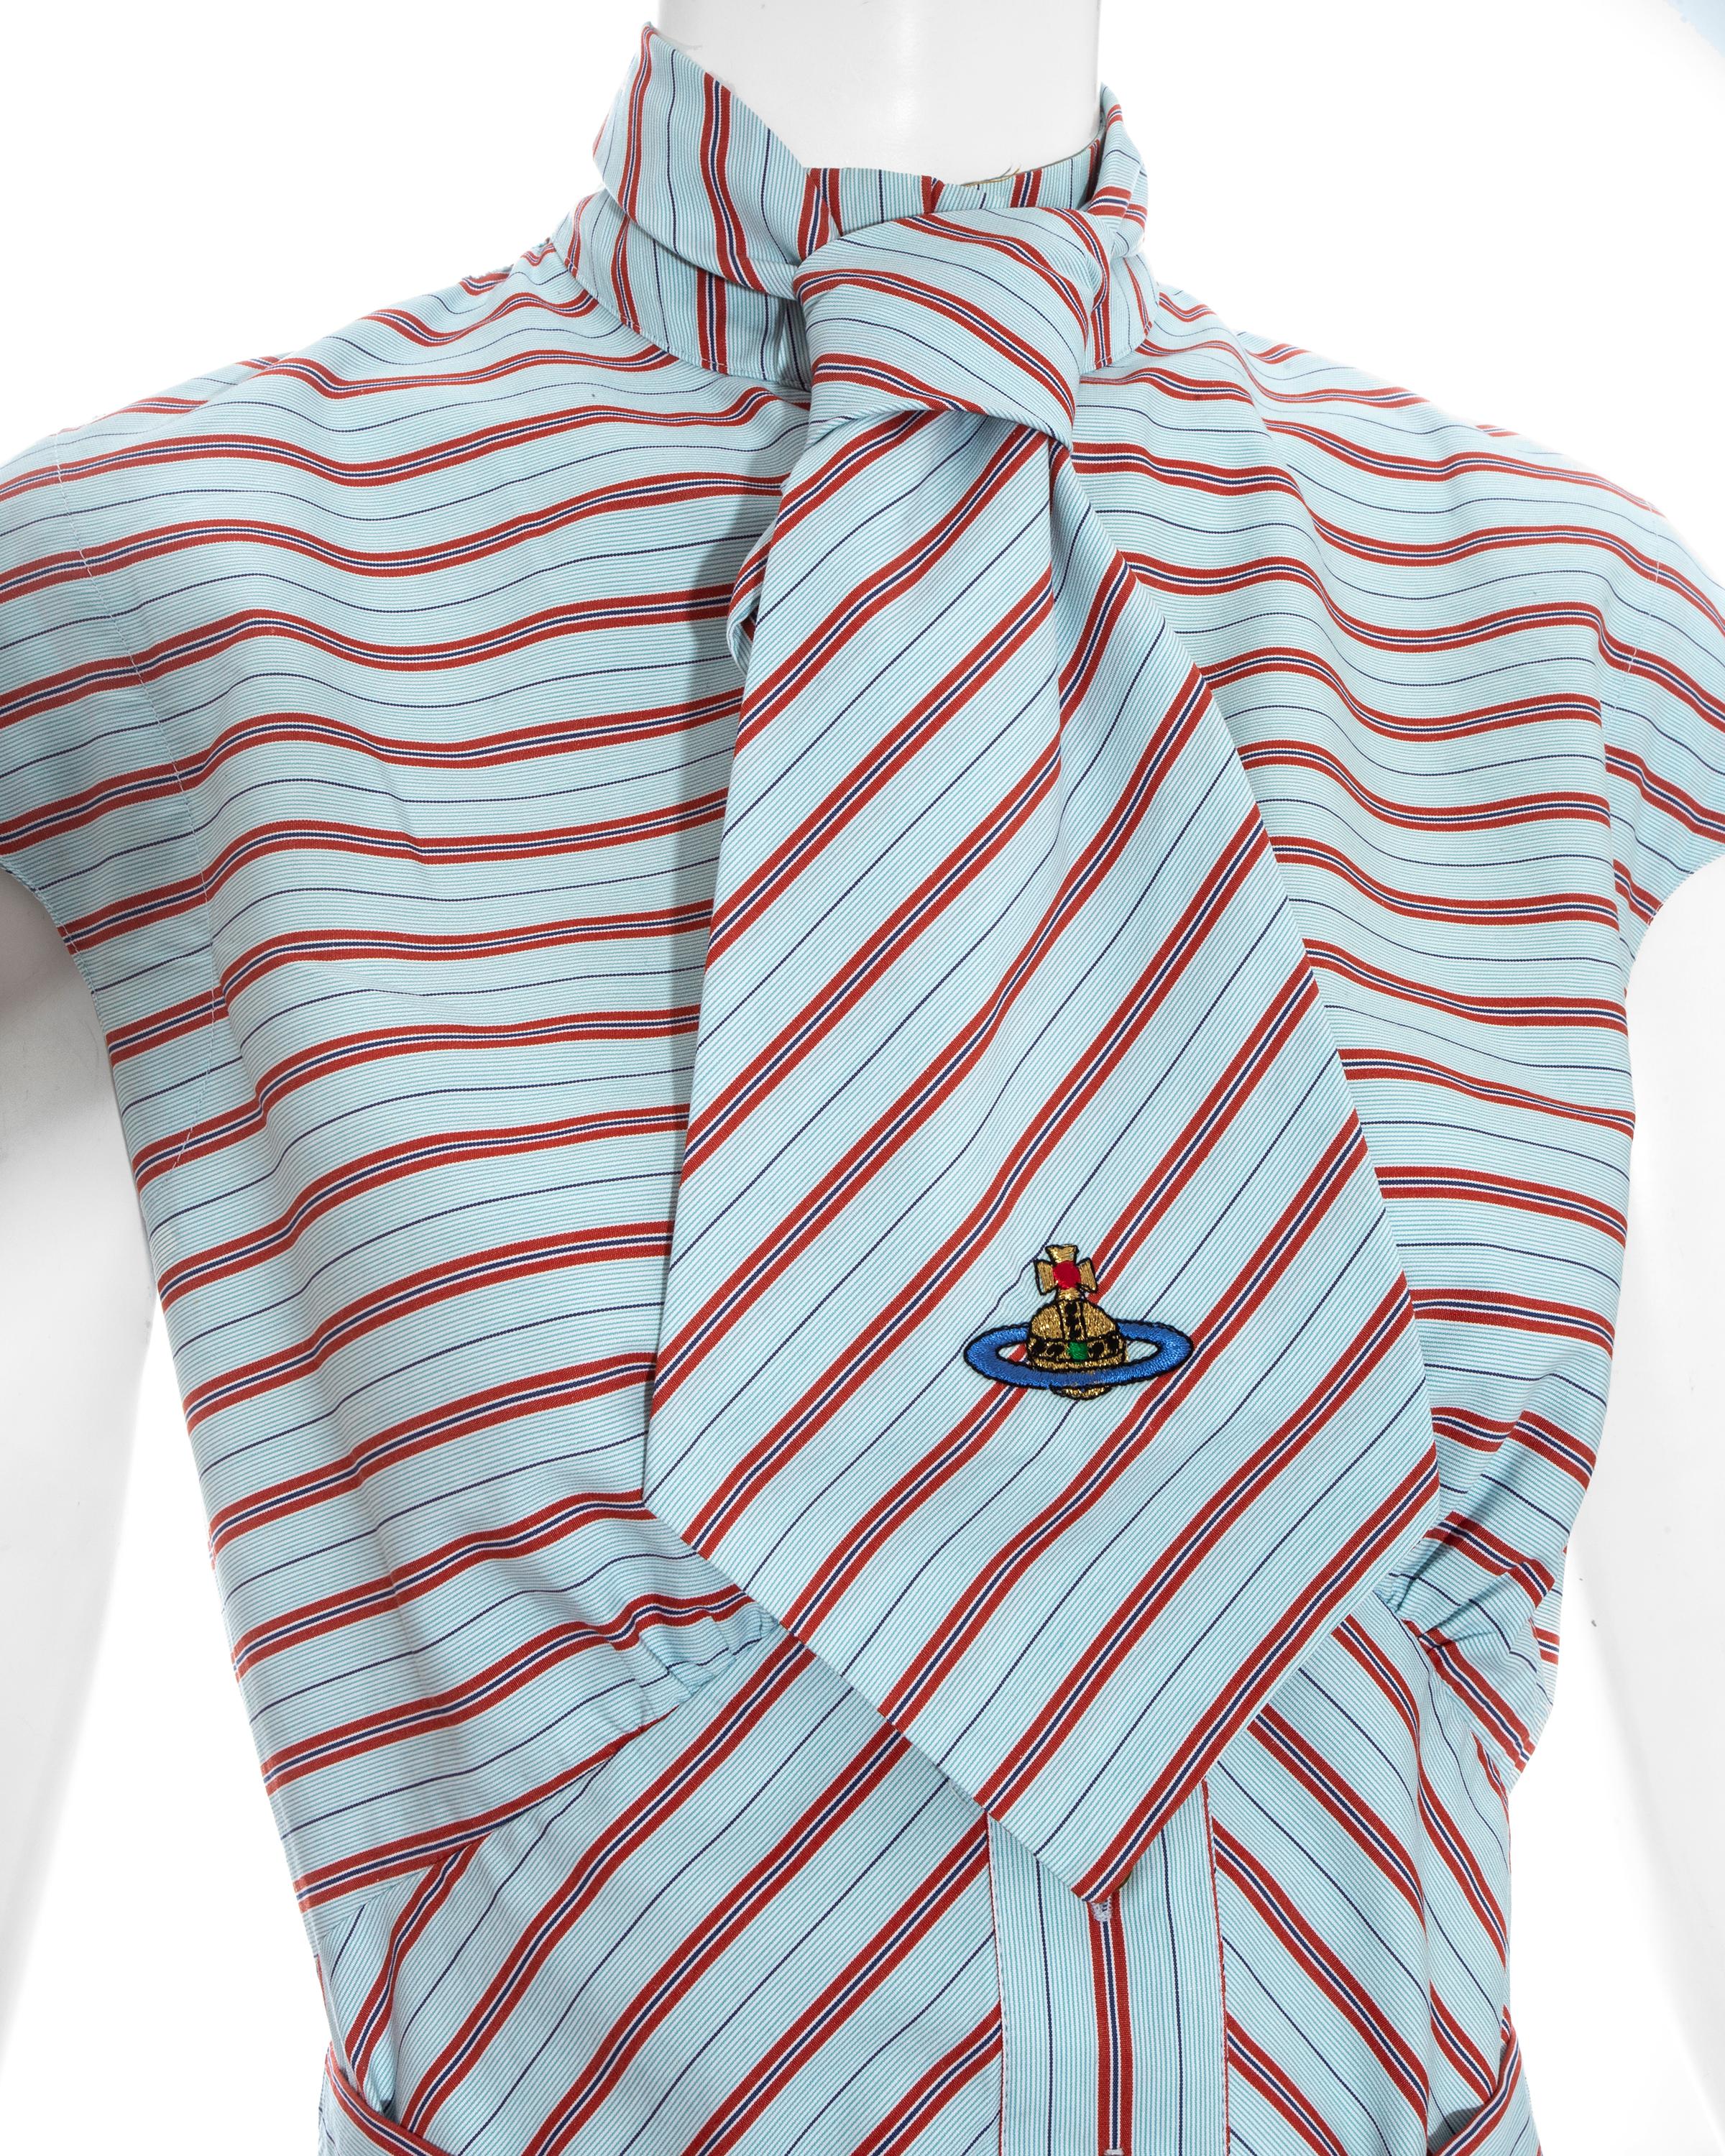 Vivienne Westwood blue and red striped skirt, blouse and tie ensemble ss 1996 In Good Condition For Sale In London, GB